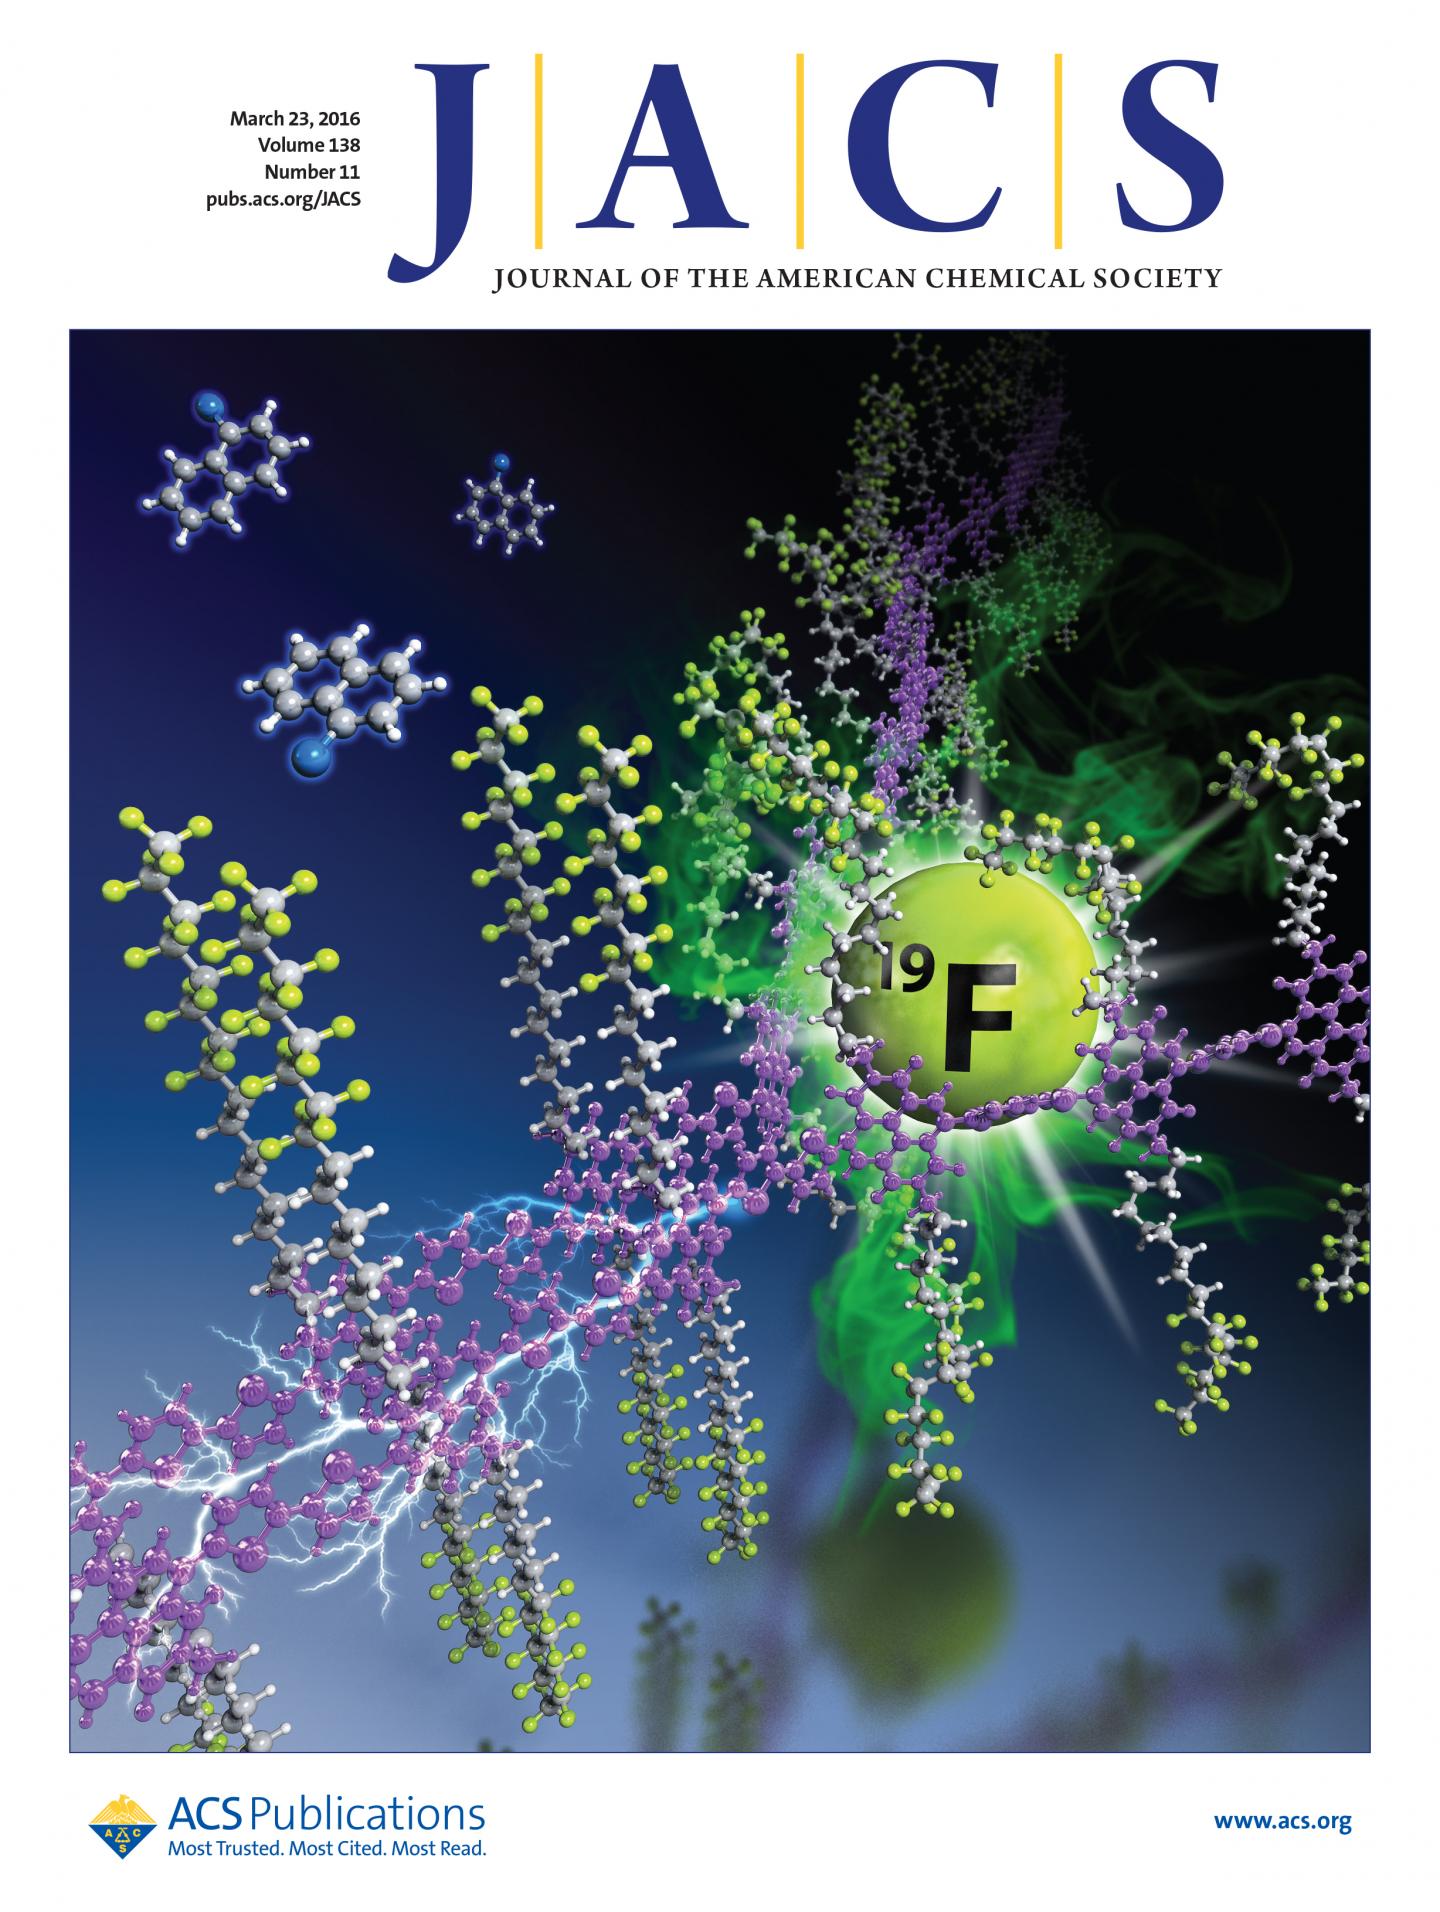 Cho et al.'s Research on the Cover of JACS